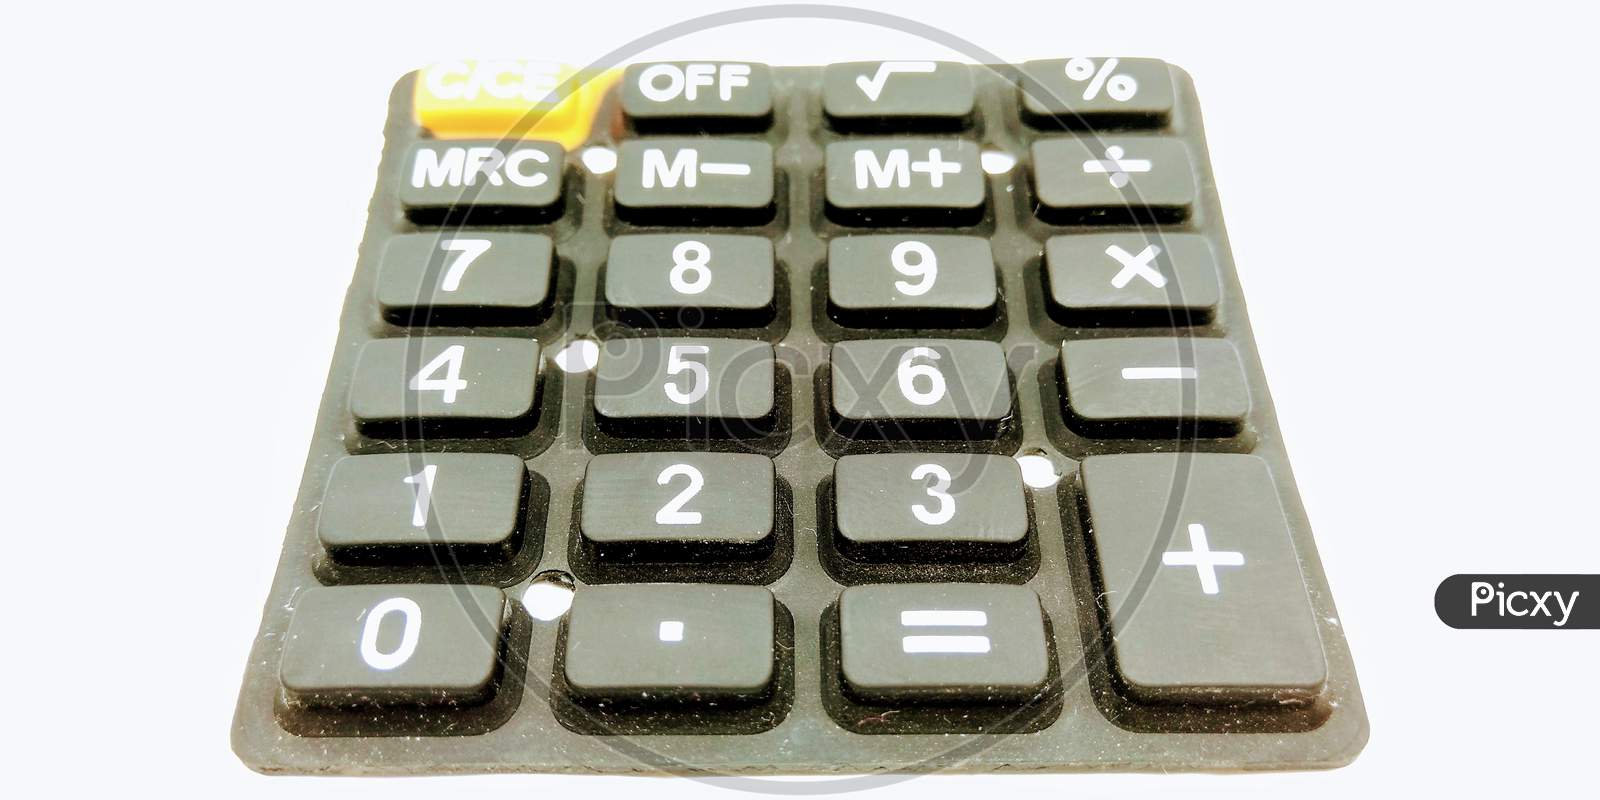 Calculator Keys Closeup Over an Isolated White Background